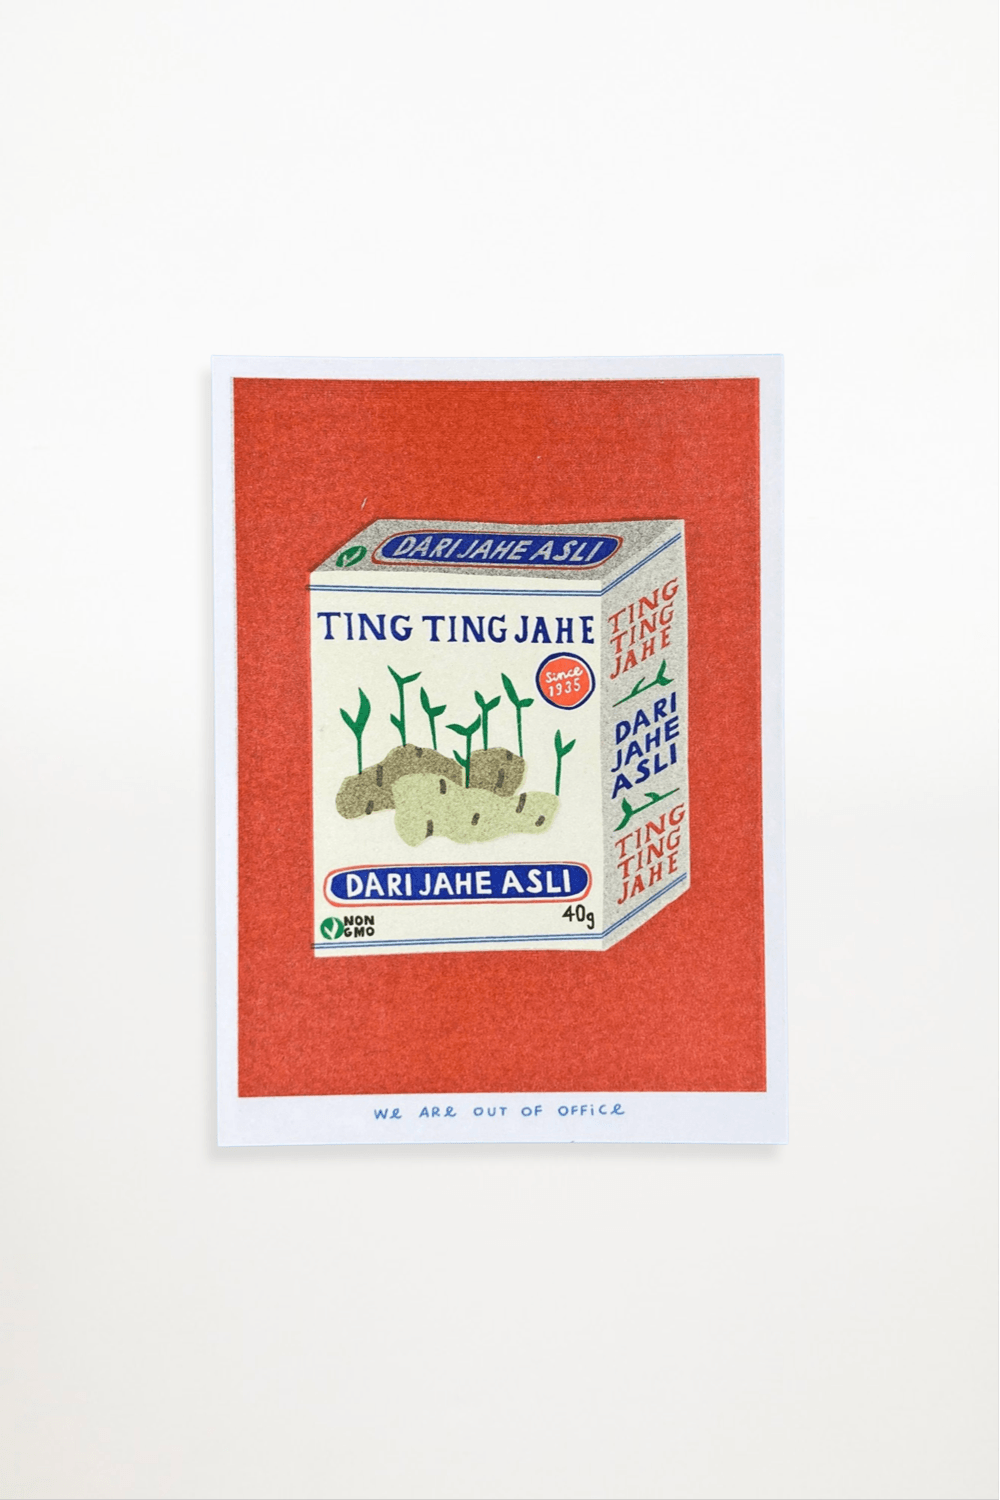 We are out of office - A risograph print of a box of ting ting candy - Ensemble Studios